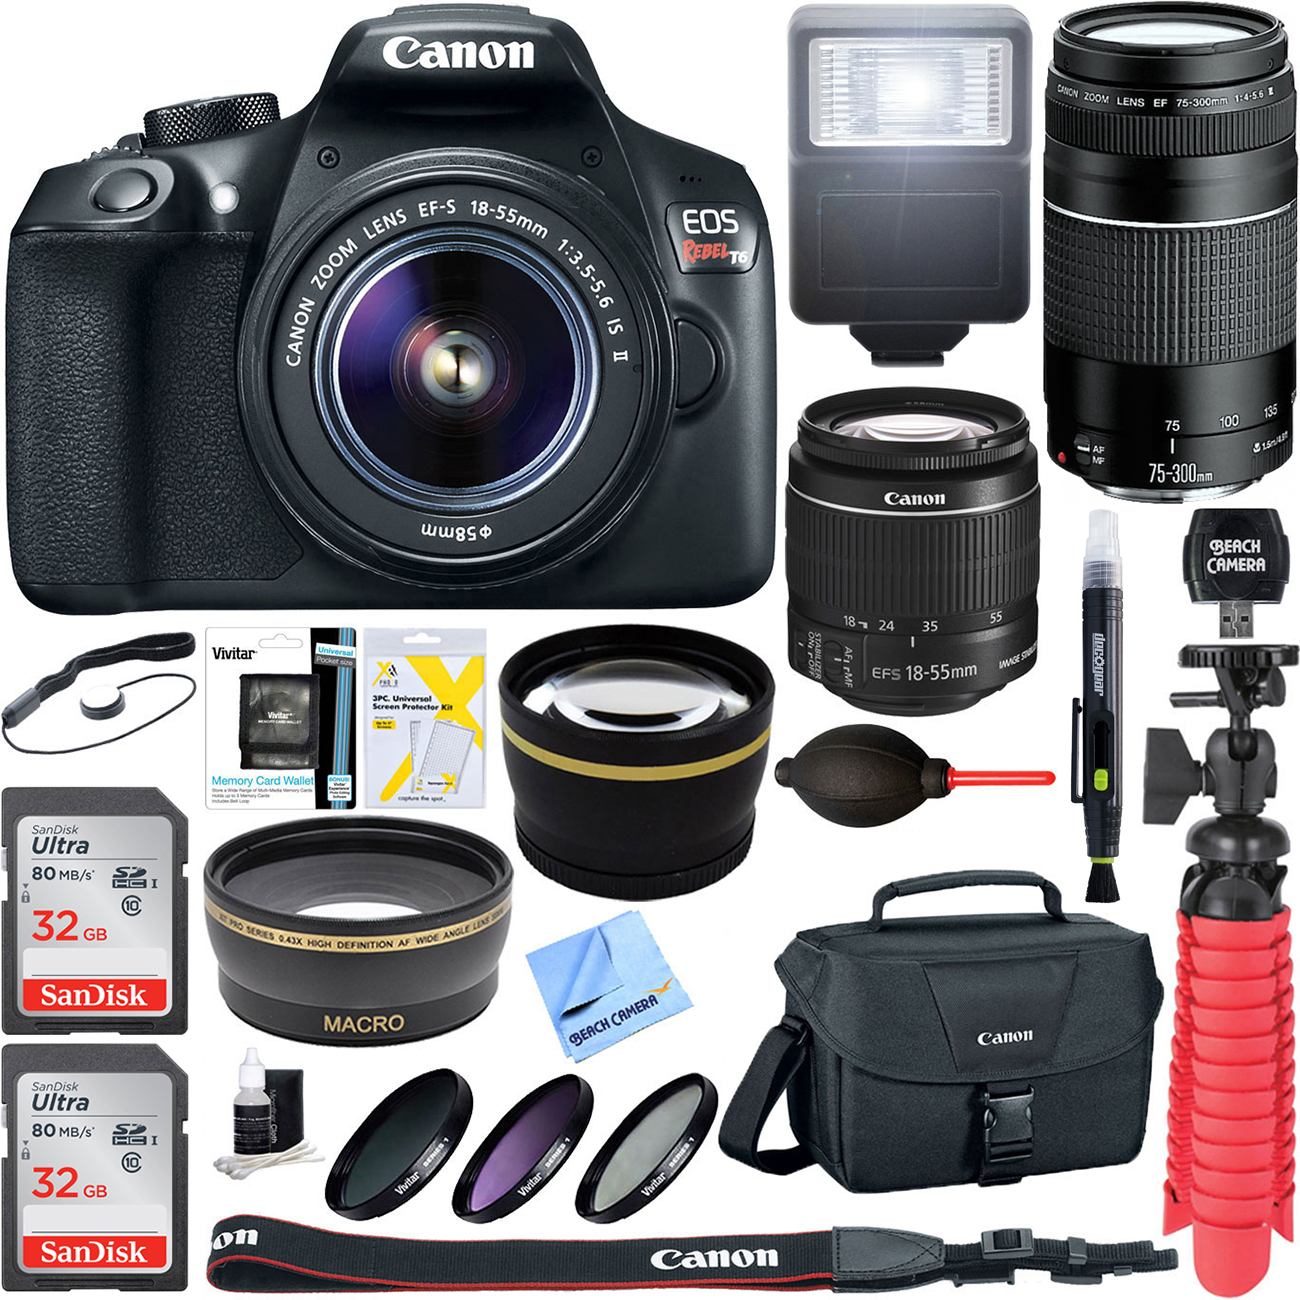 Canon EOS Rebel T6 Digital SLR Camera with EF-S 18-55mm IS II and Canon EF 75-300mm Telephoto Lens USA (Black) 19PC Professional Bundle